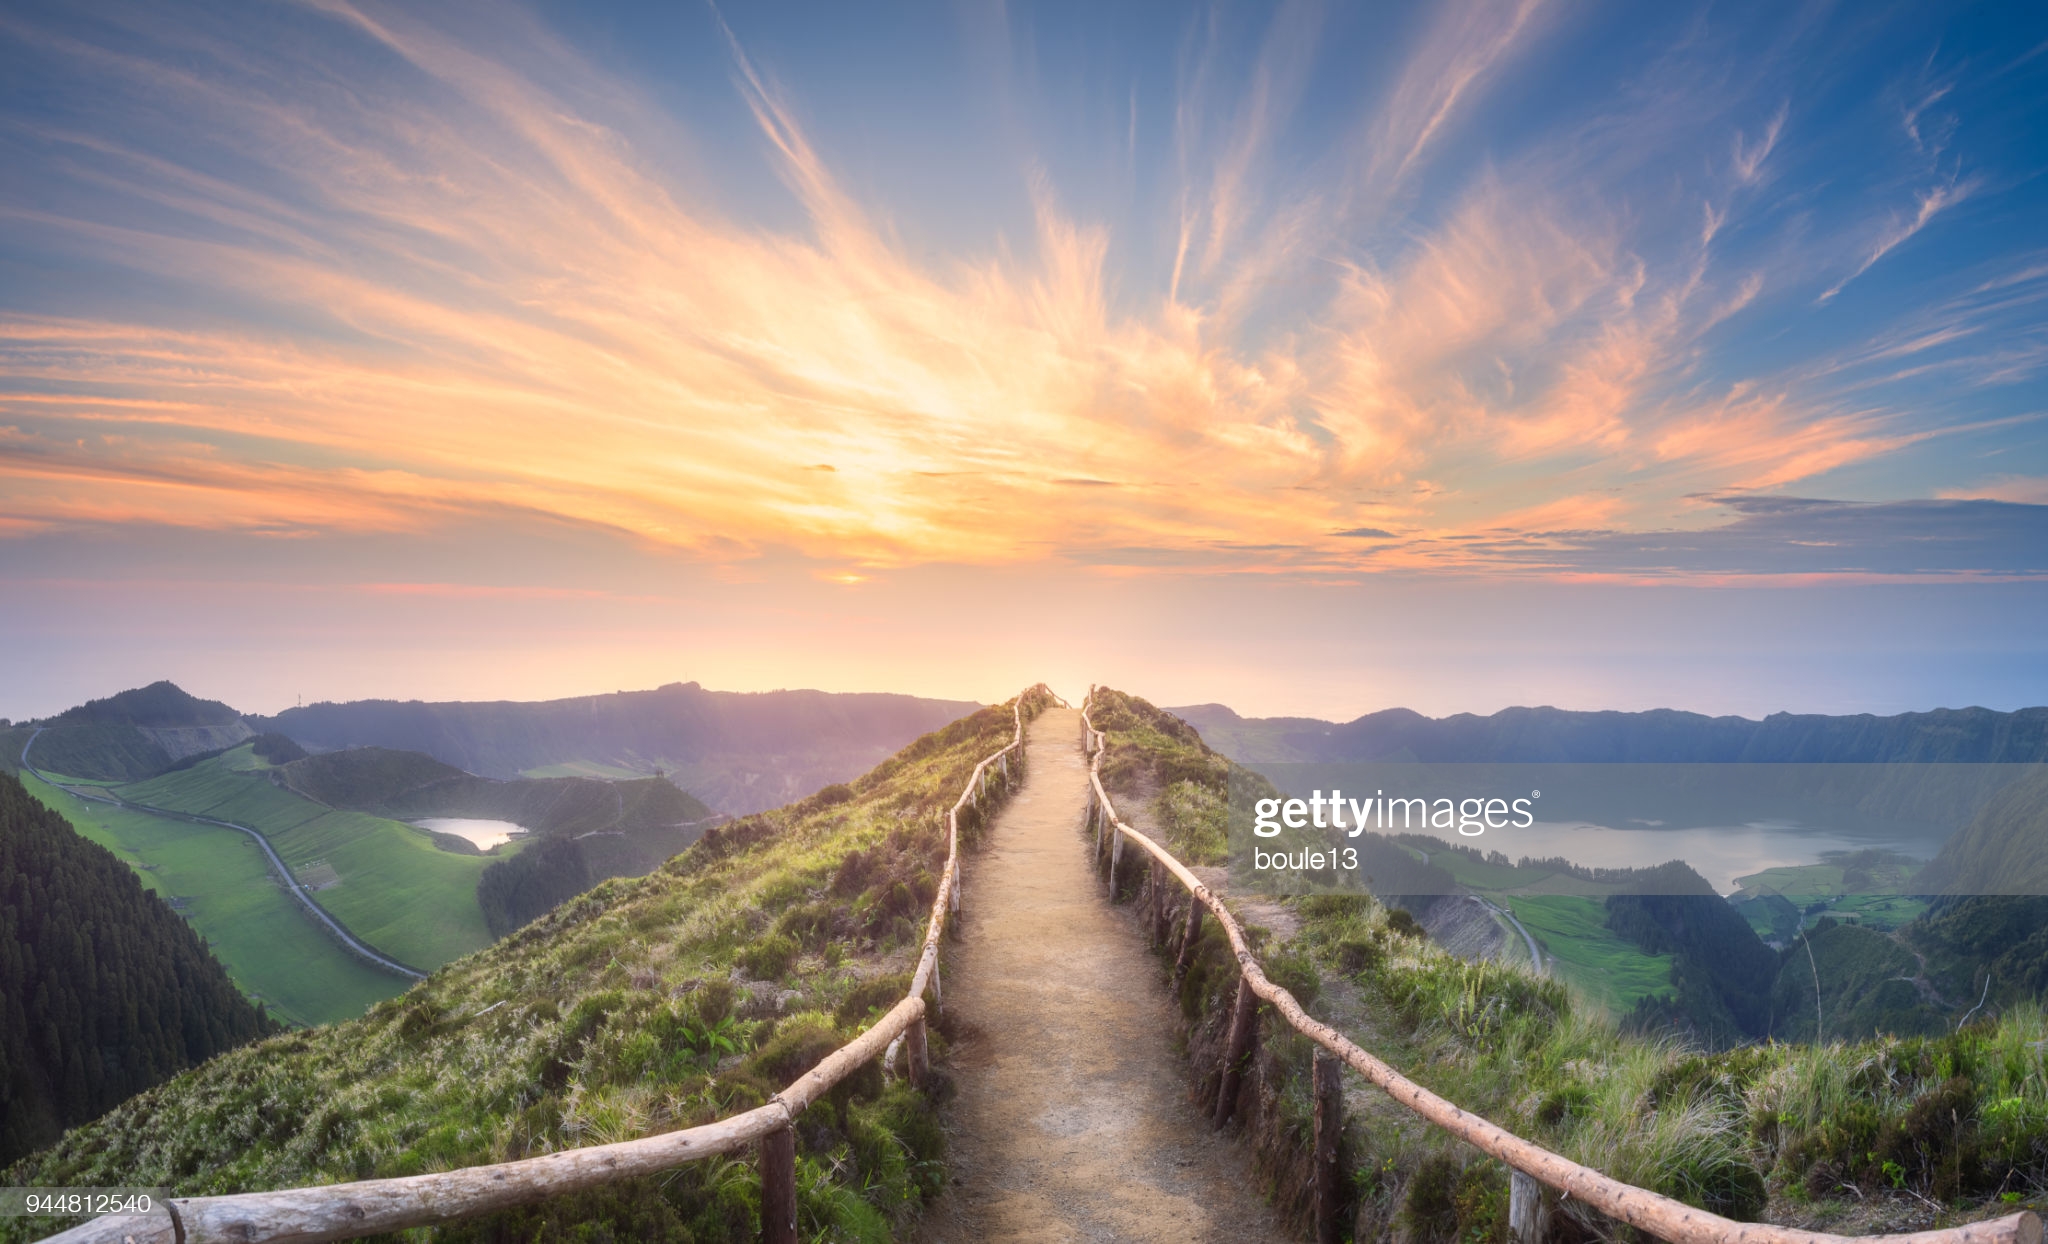 A hilltop path with the sunset in the background